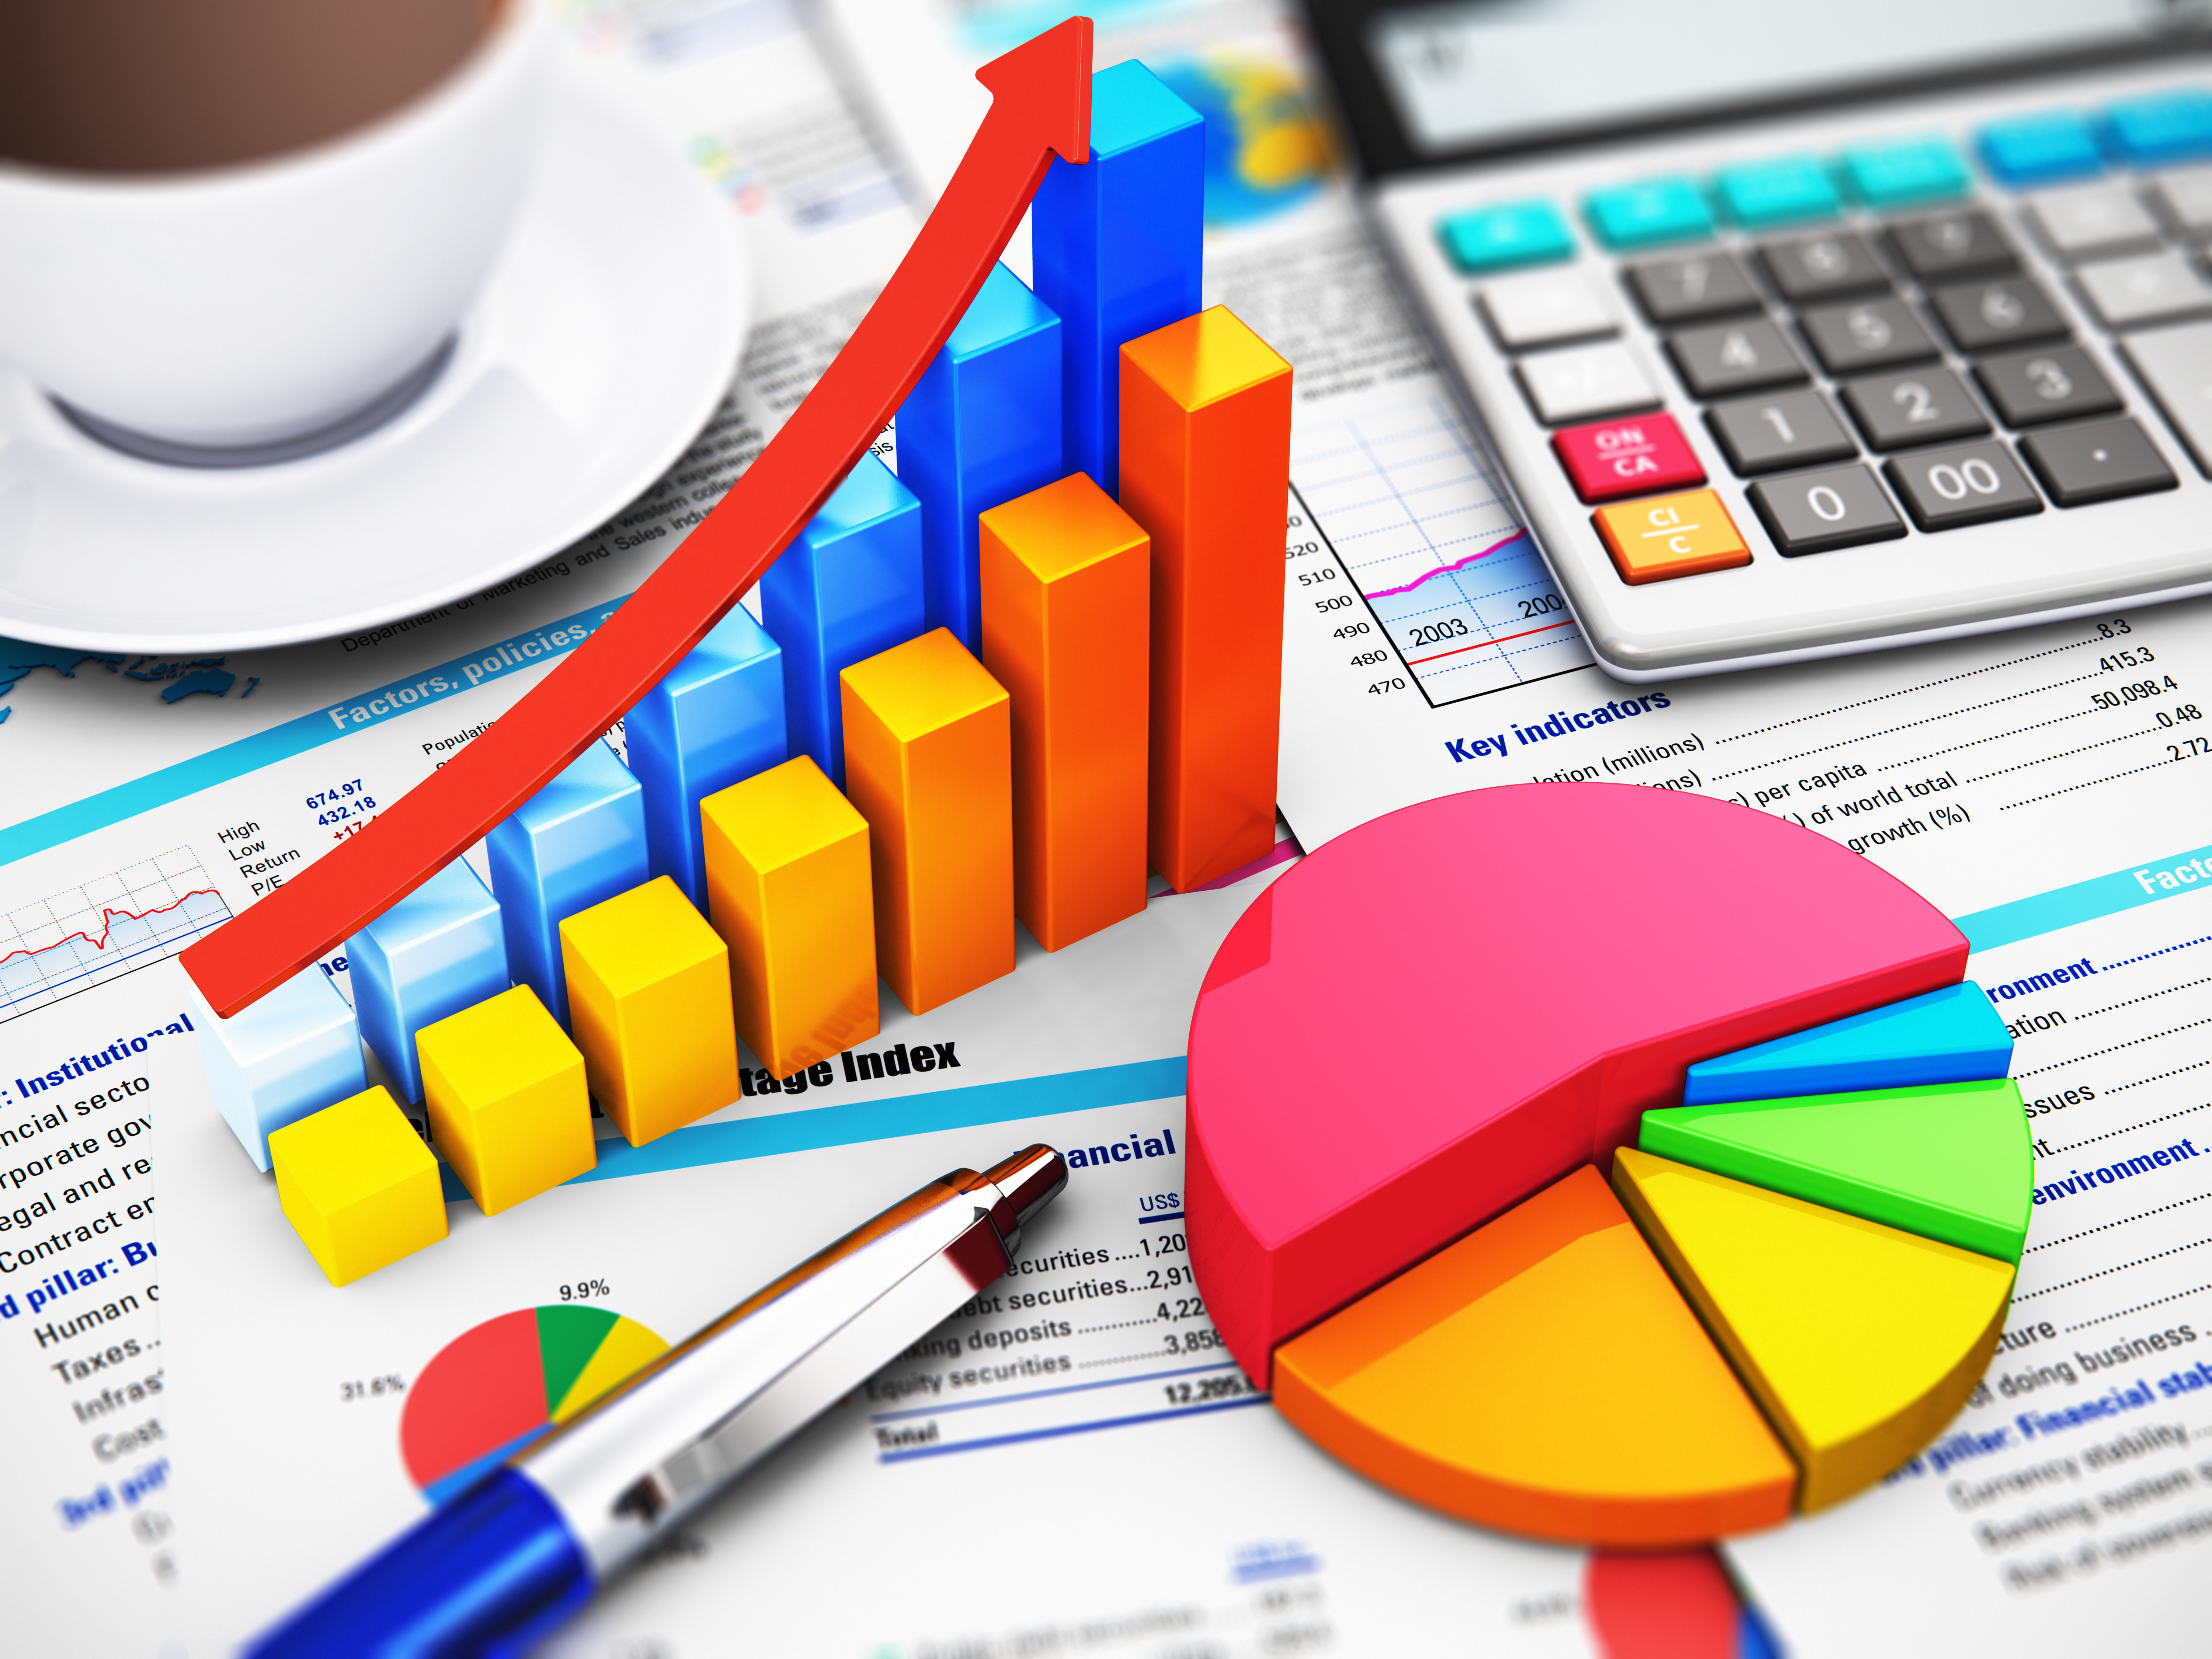 Business Finance, Tax, Accounting, Statistics And Analytic Research Concept: Macro View Of Office Electronic Calculator, Bar Graph Charts, Pie Diagram And Ballpoint Pen On Financial Reports With Colorful Data With Selective Focus Effect